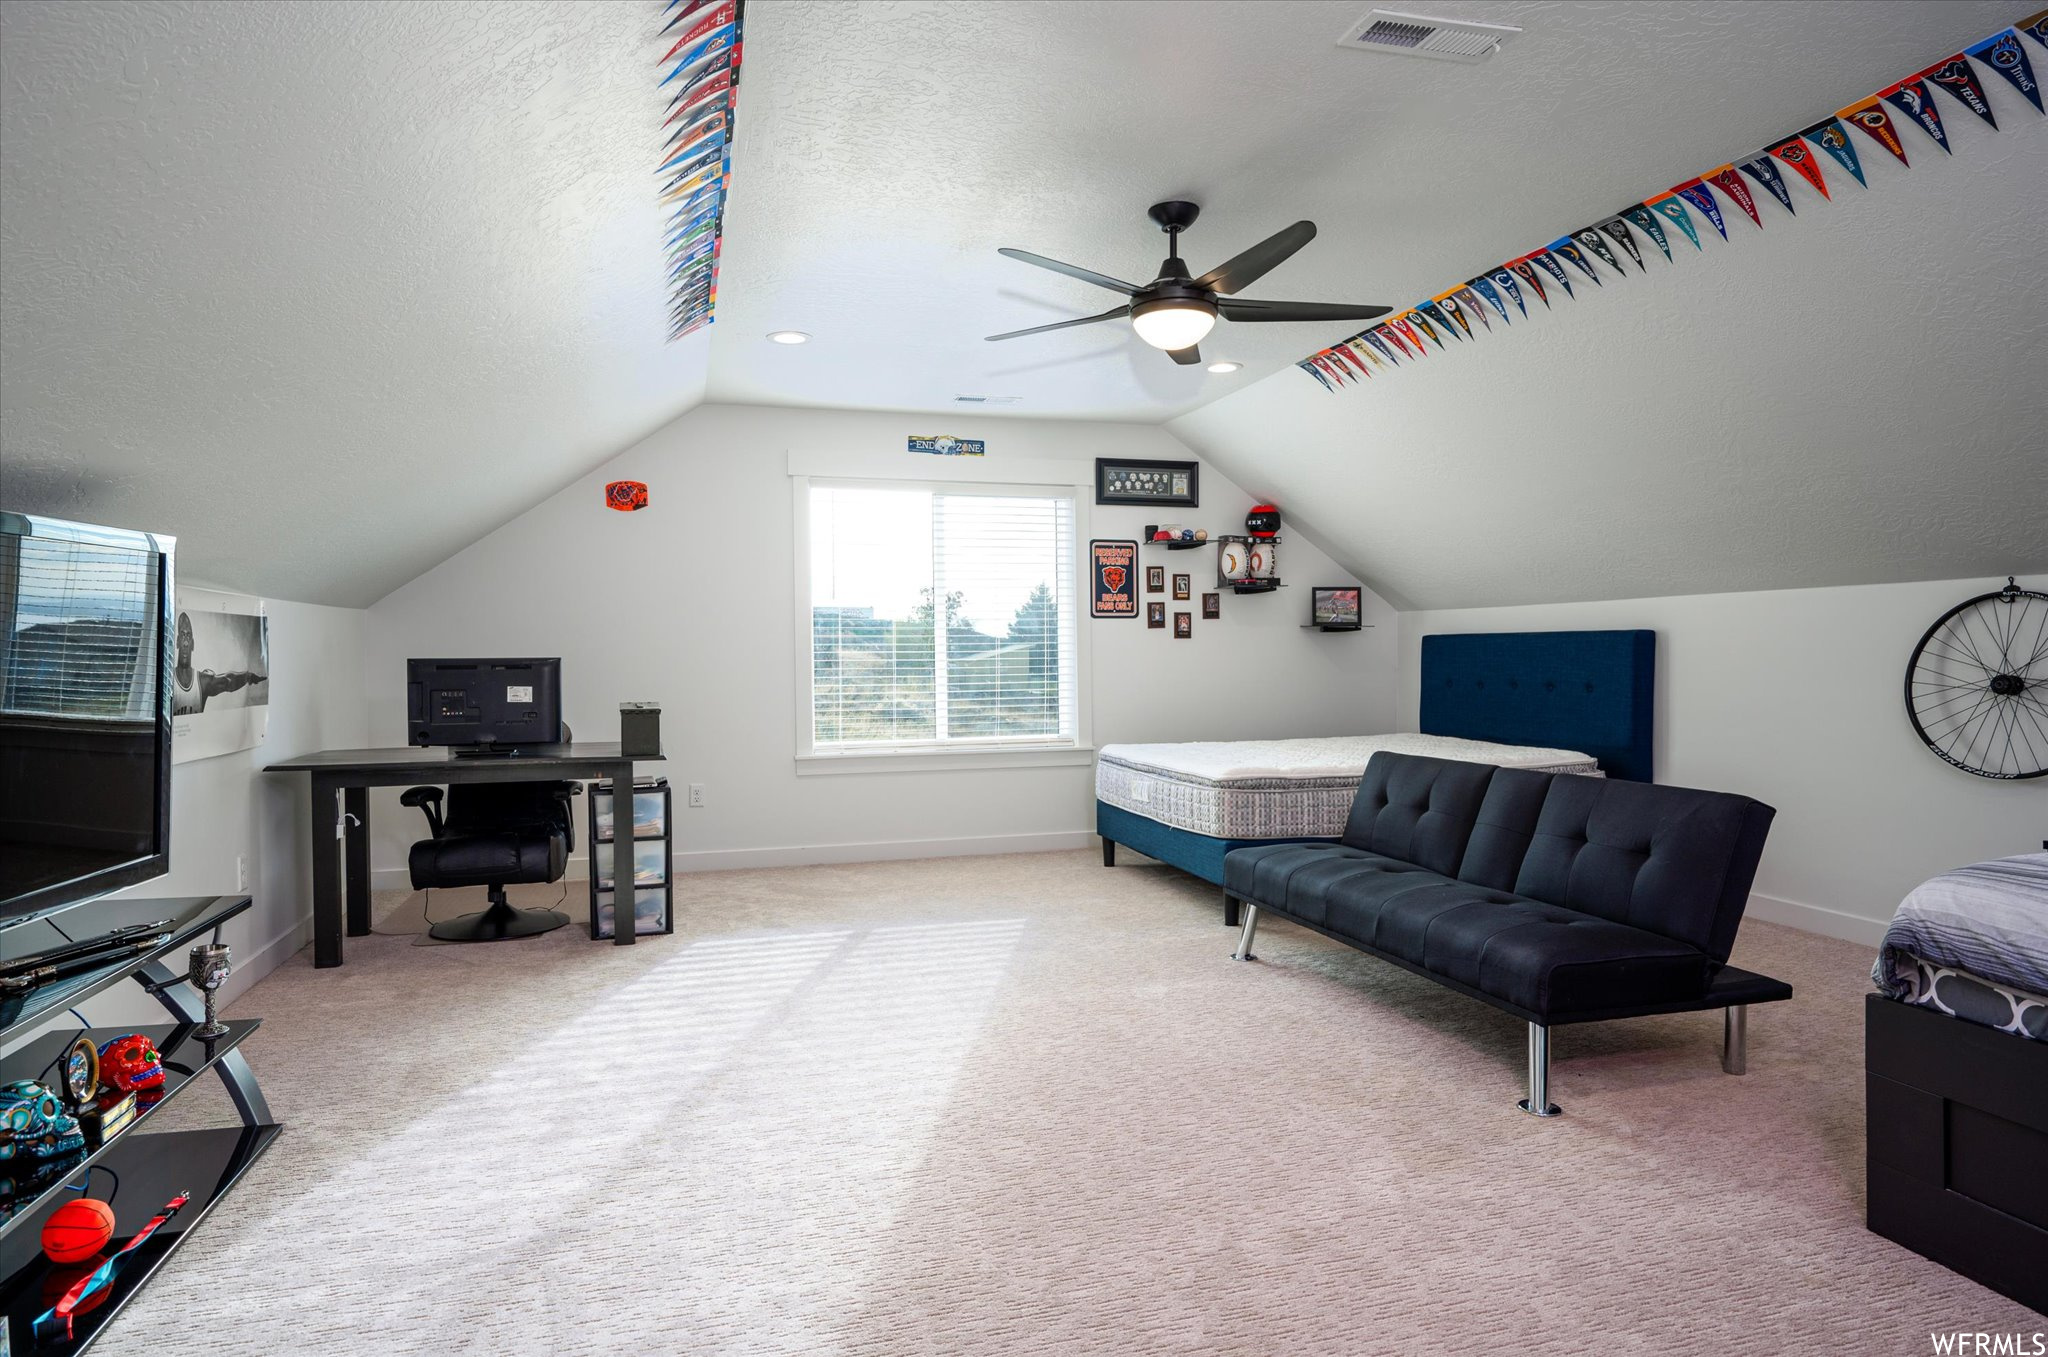 Sitting room with lofted ceiling, light colored carpet, ceiling fan, and a textured ceiling